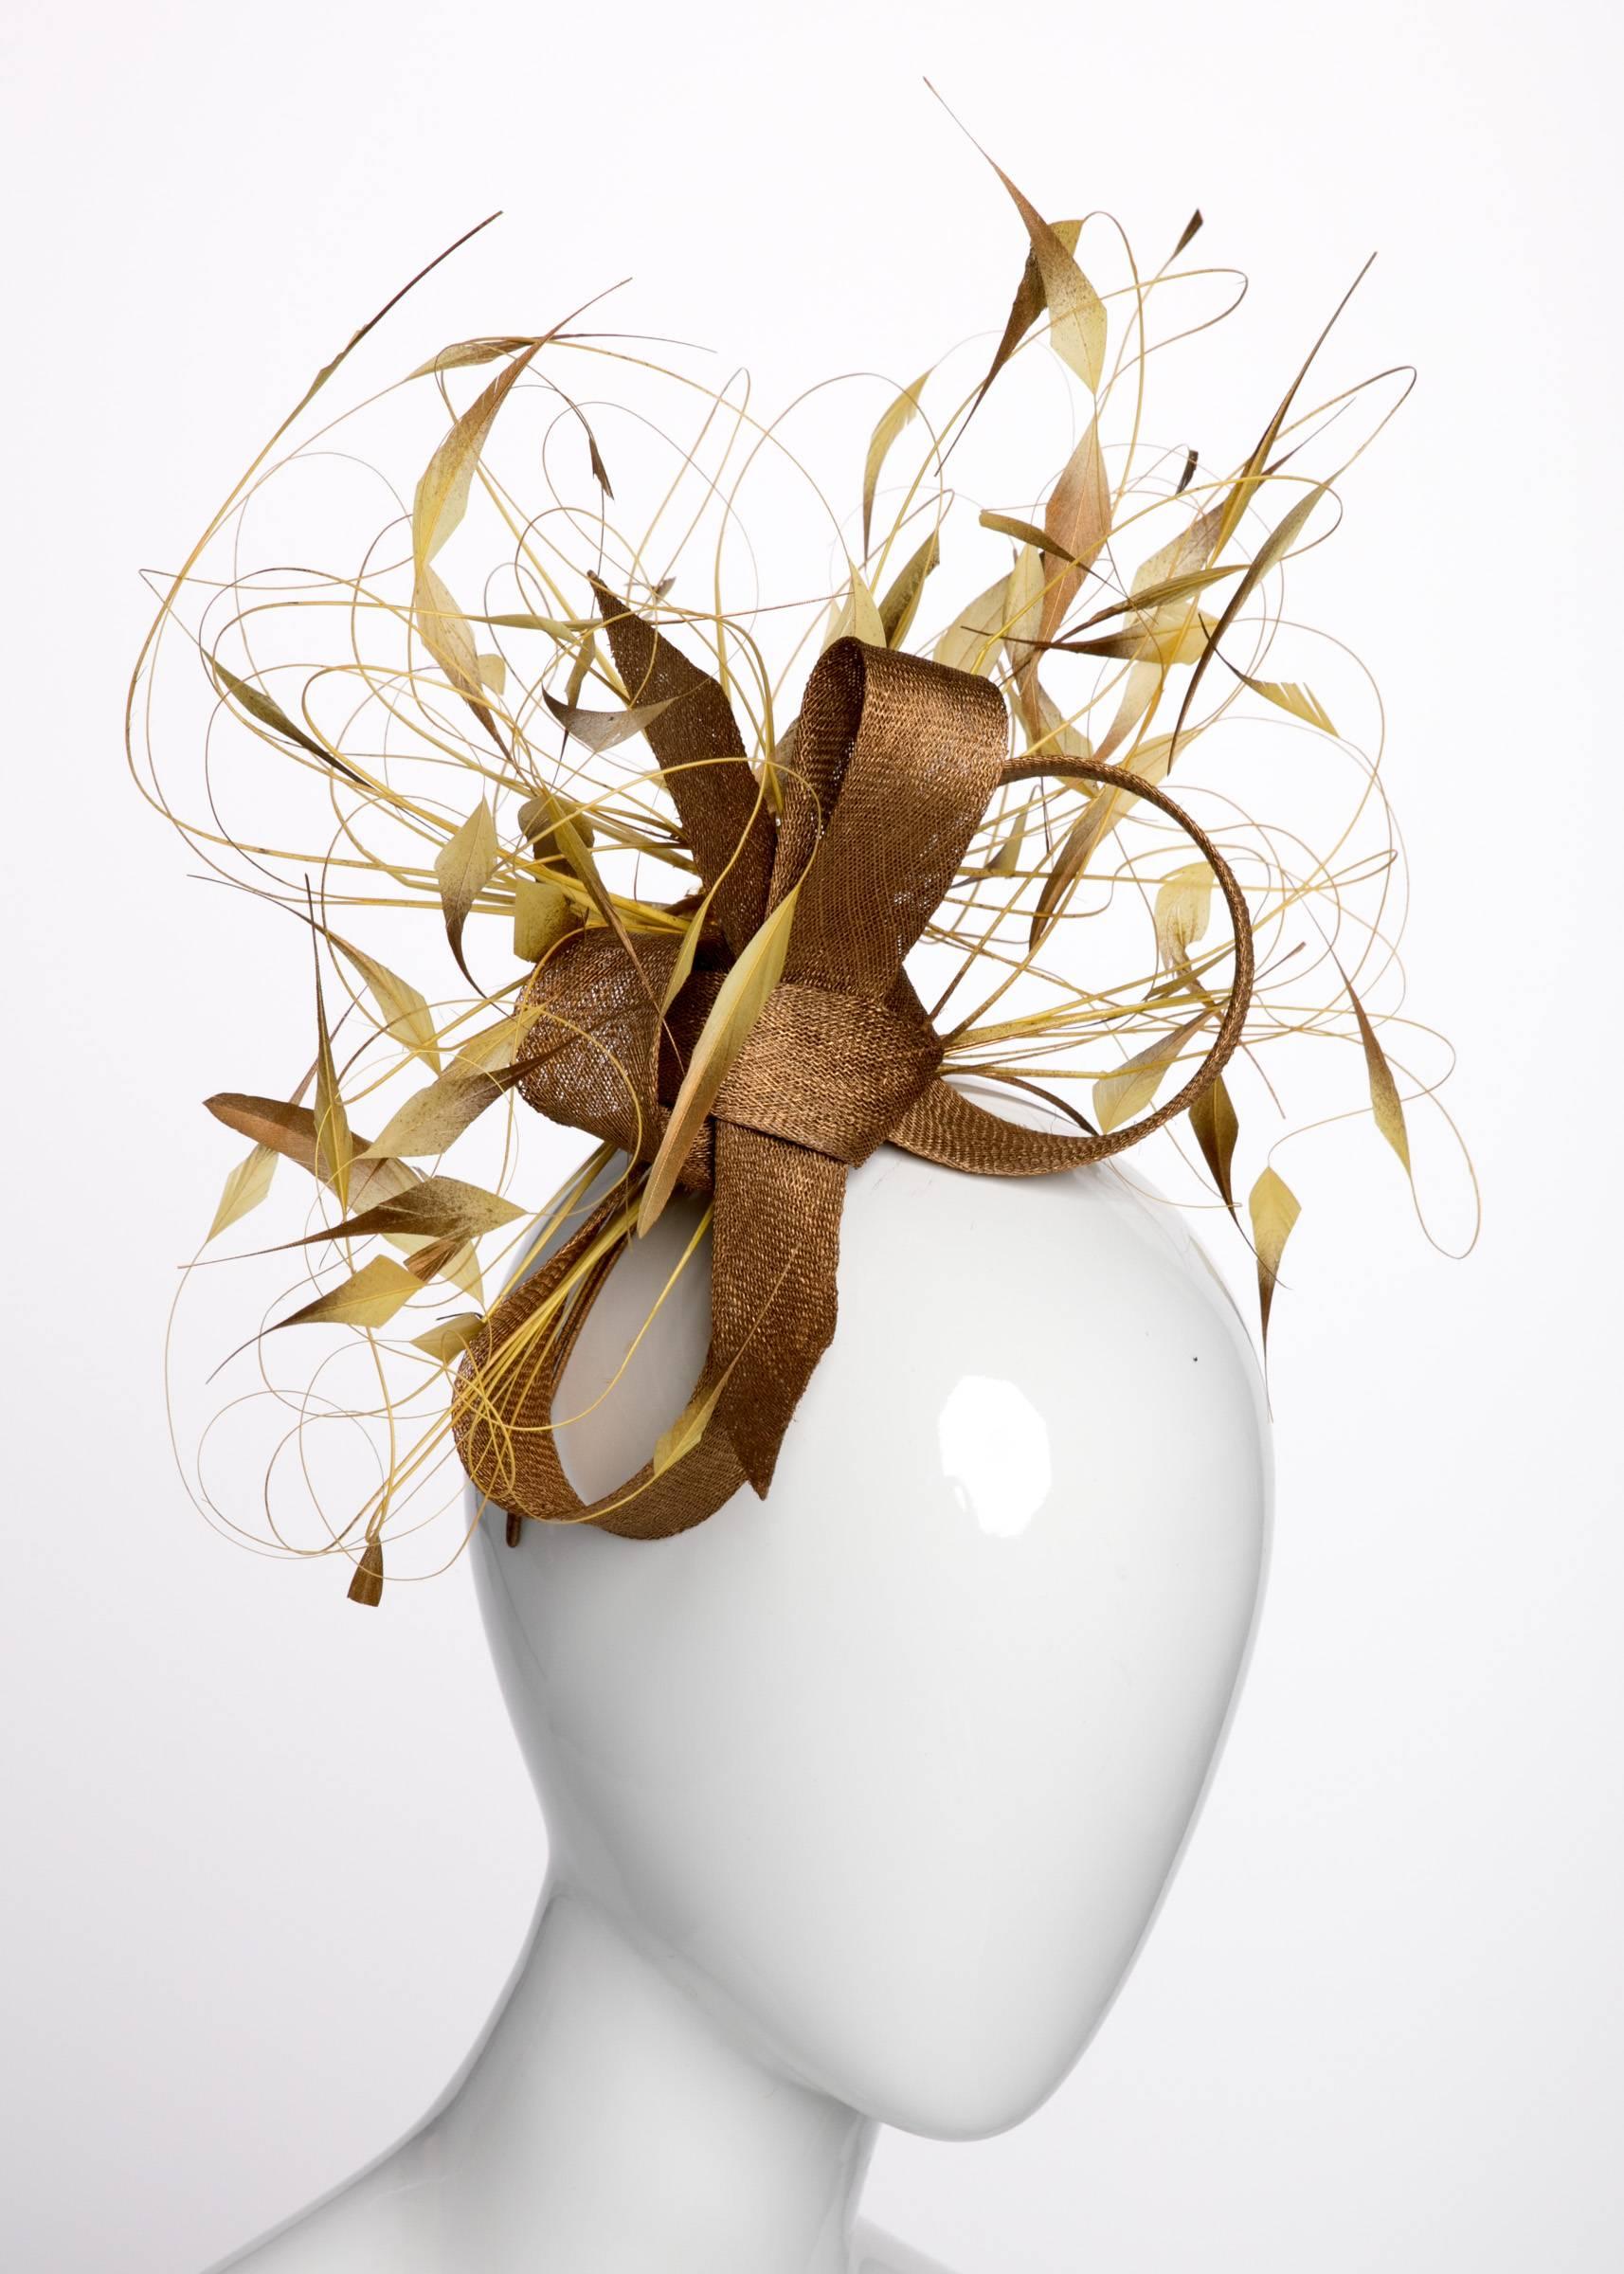 Philip Treacy is a milliner who has done what most modern day milliners cannot; he has become a renowned milliner. Irish born Treacy has designed hats for British royalty, as well as for design houses directed by fashion royalty like Karl Lagerfeld